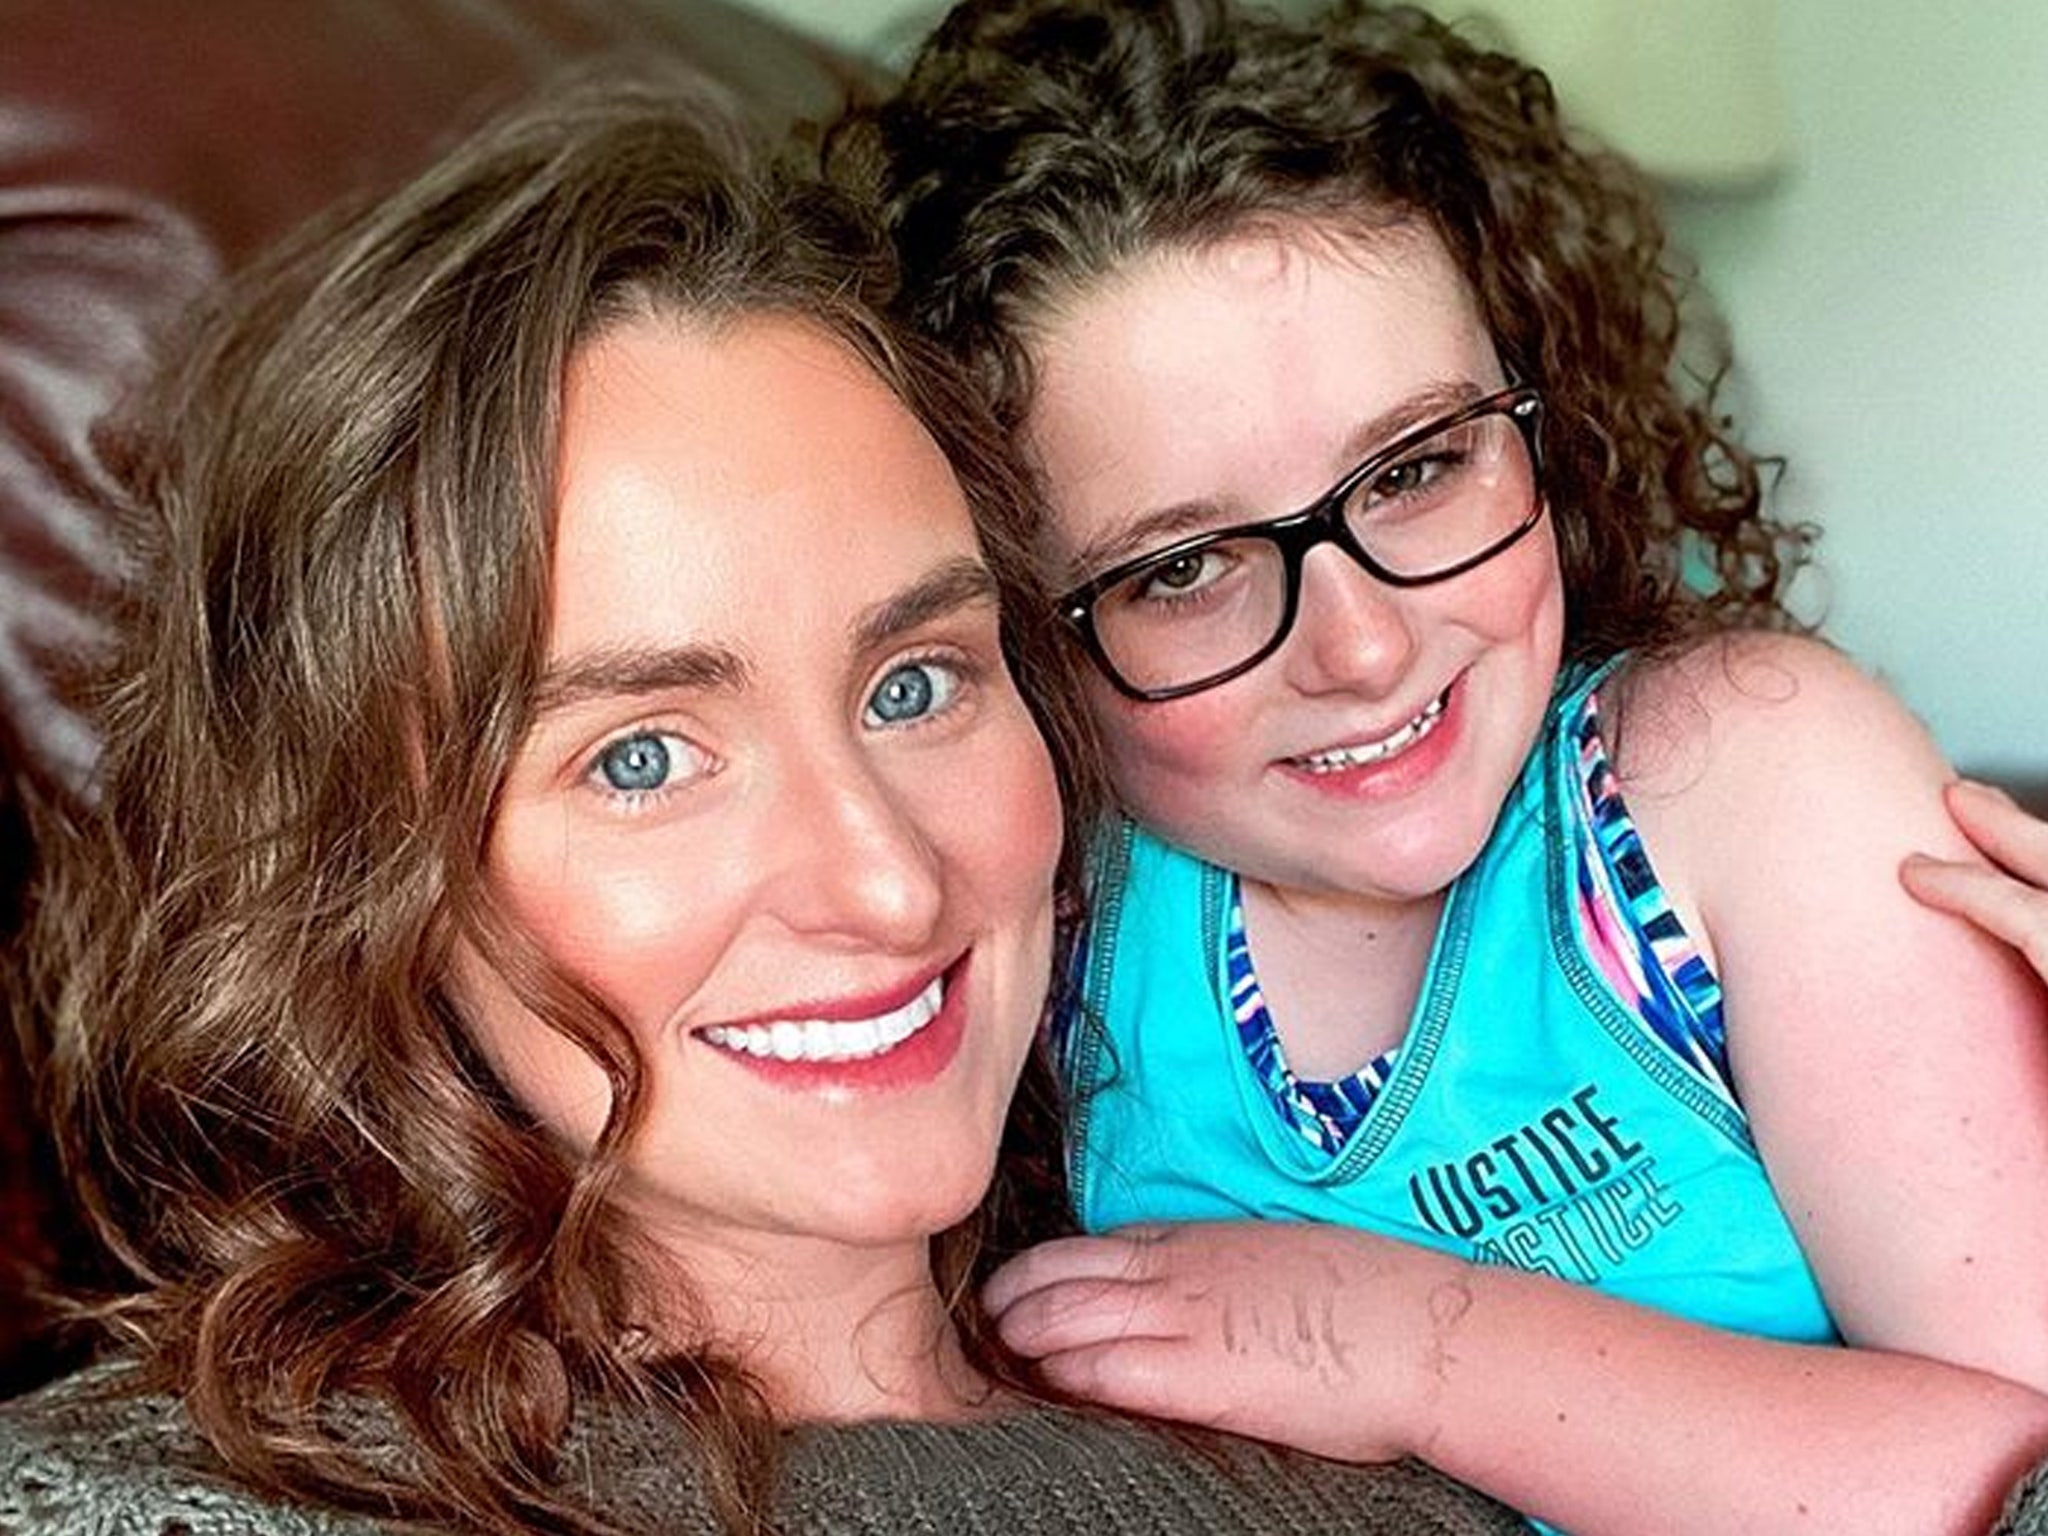 Teen Mom Leah Messer ripped for boasting she's 'humble' while